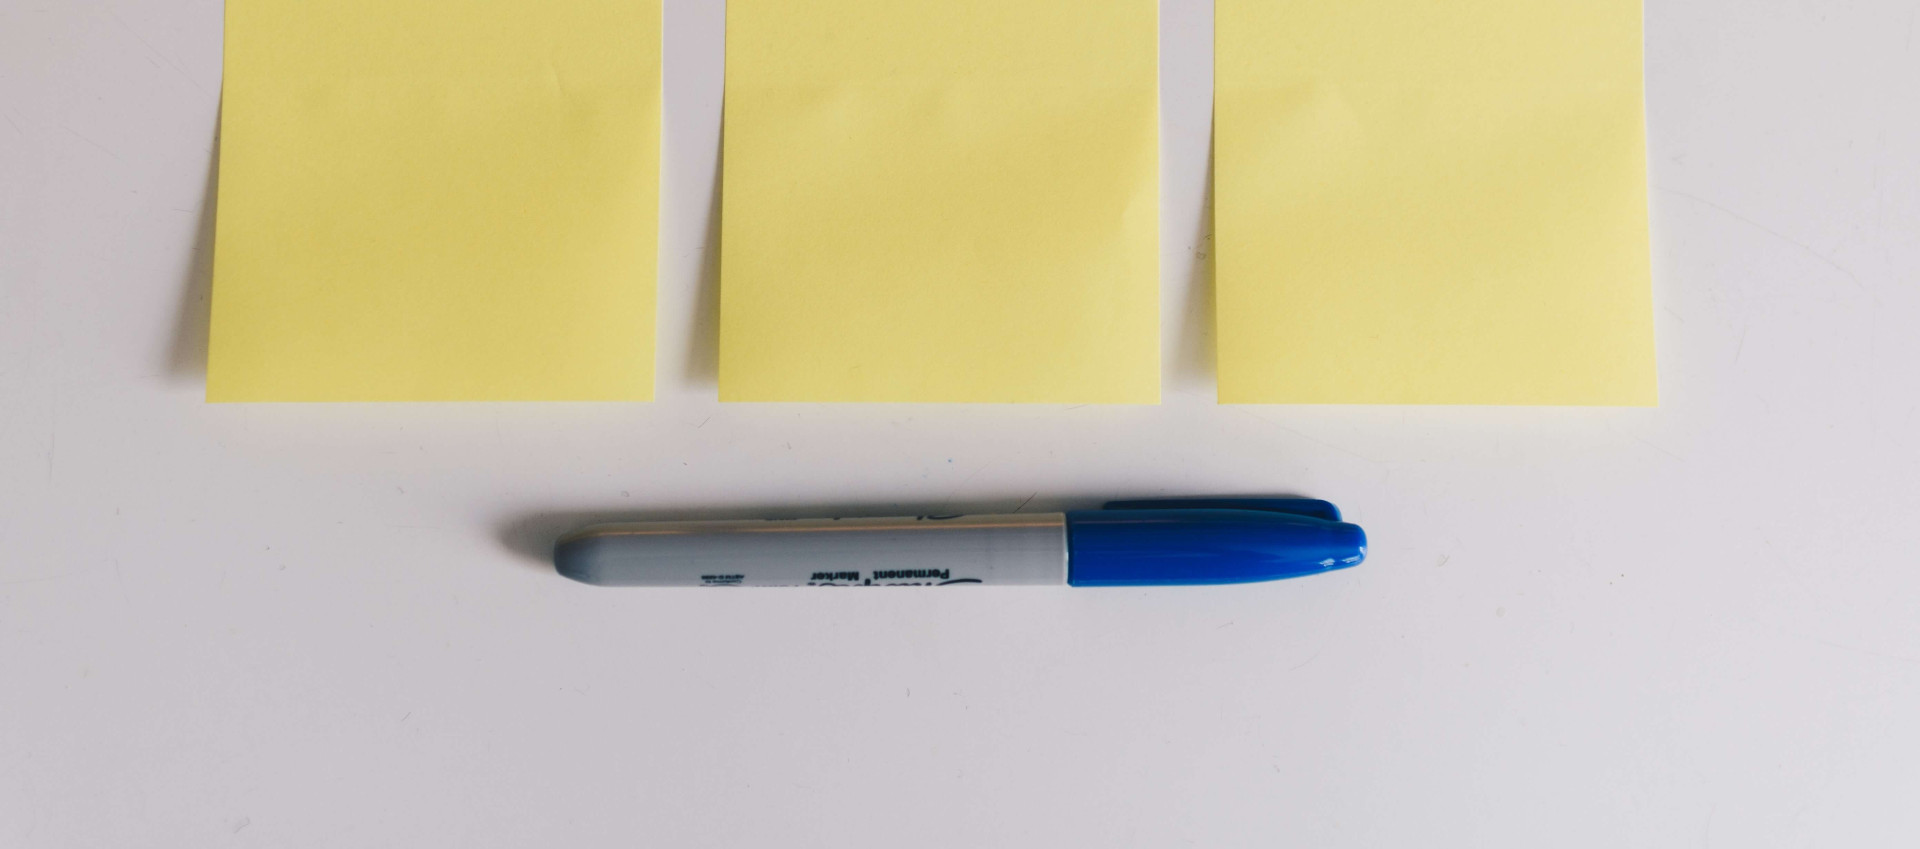 three yellow post it notes with blue sharpy pen underneath on white surface